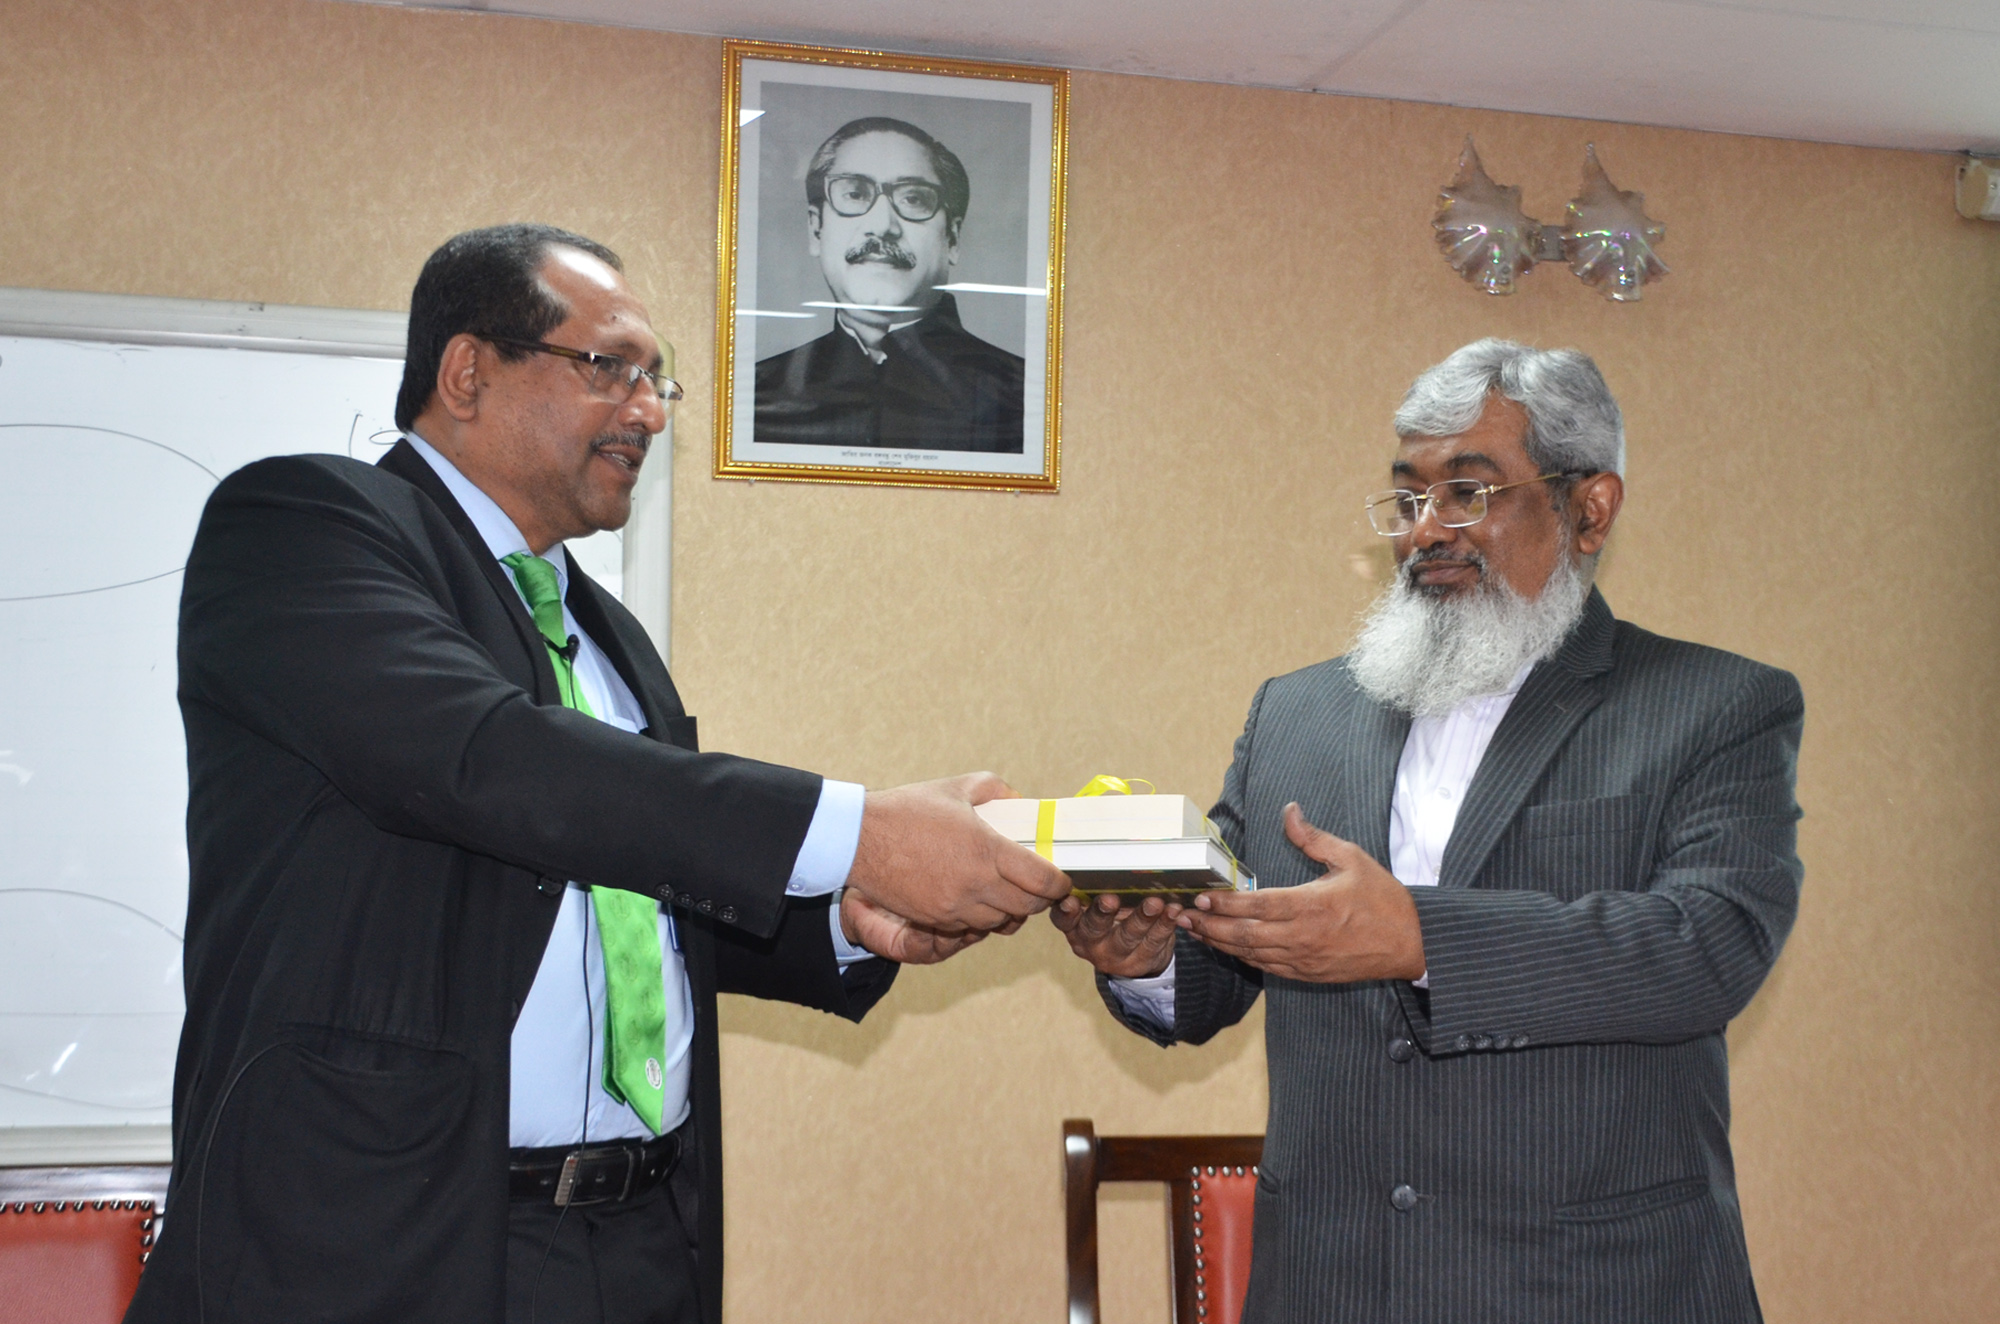 Cabinet Secretary Receiving Gift From Ractor of bpatc